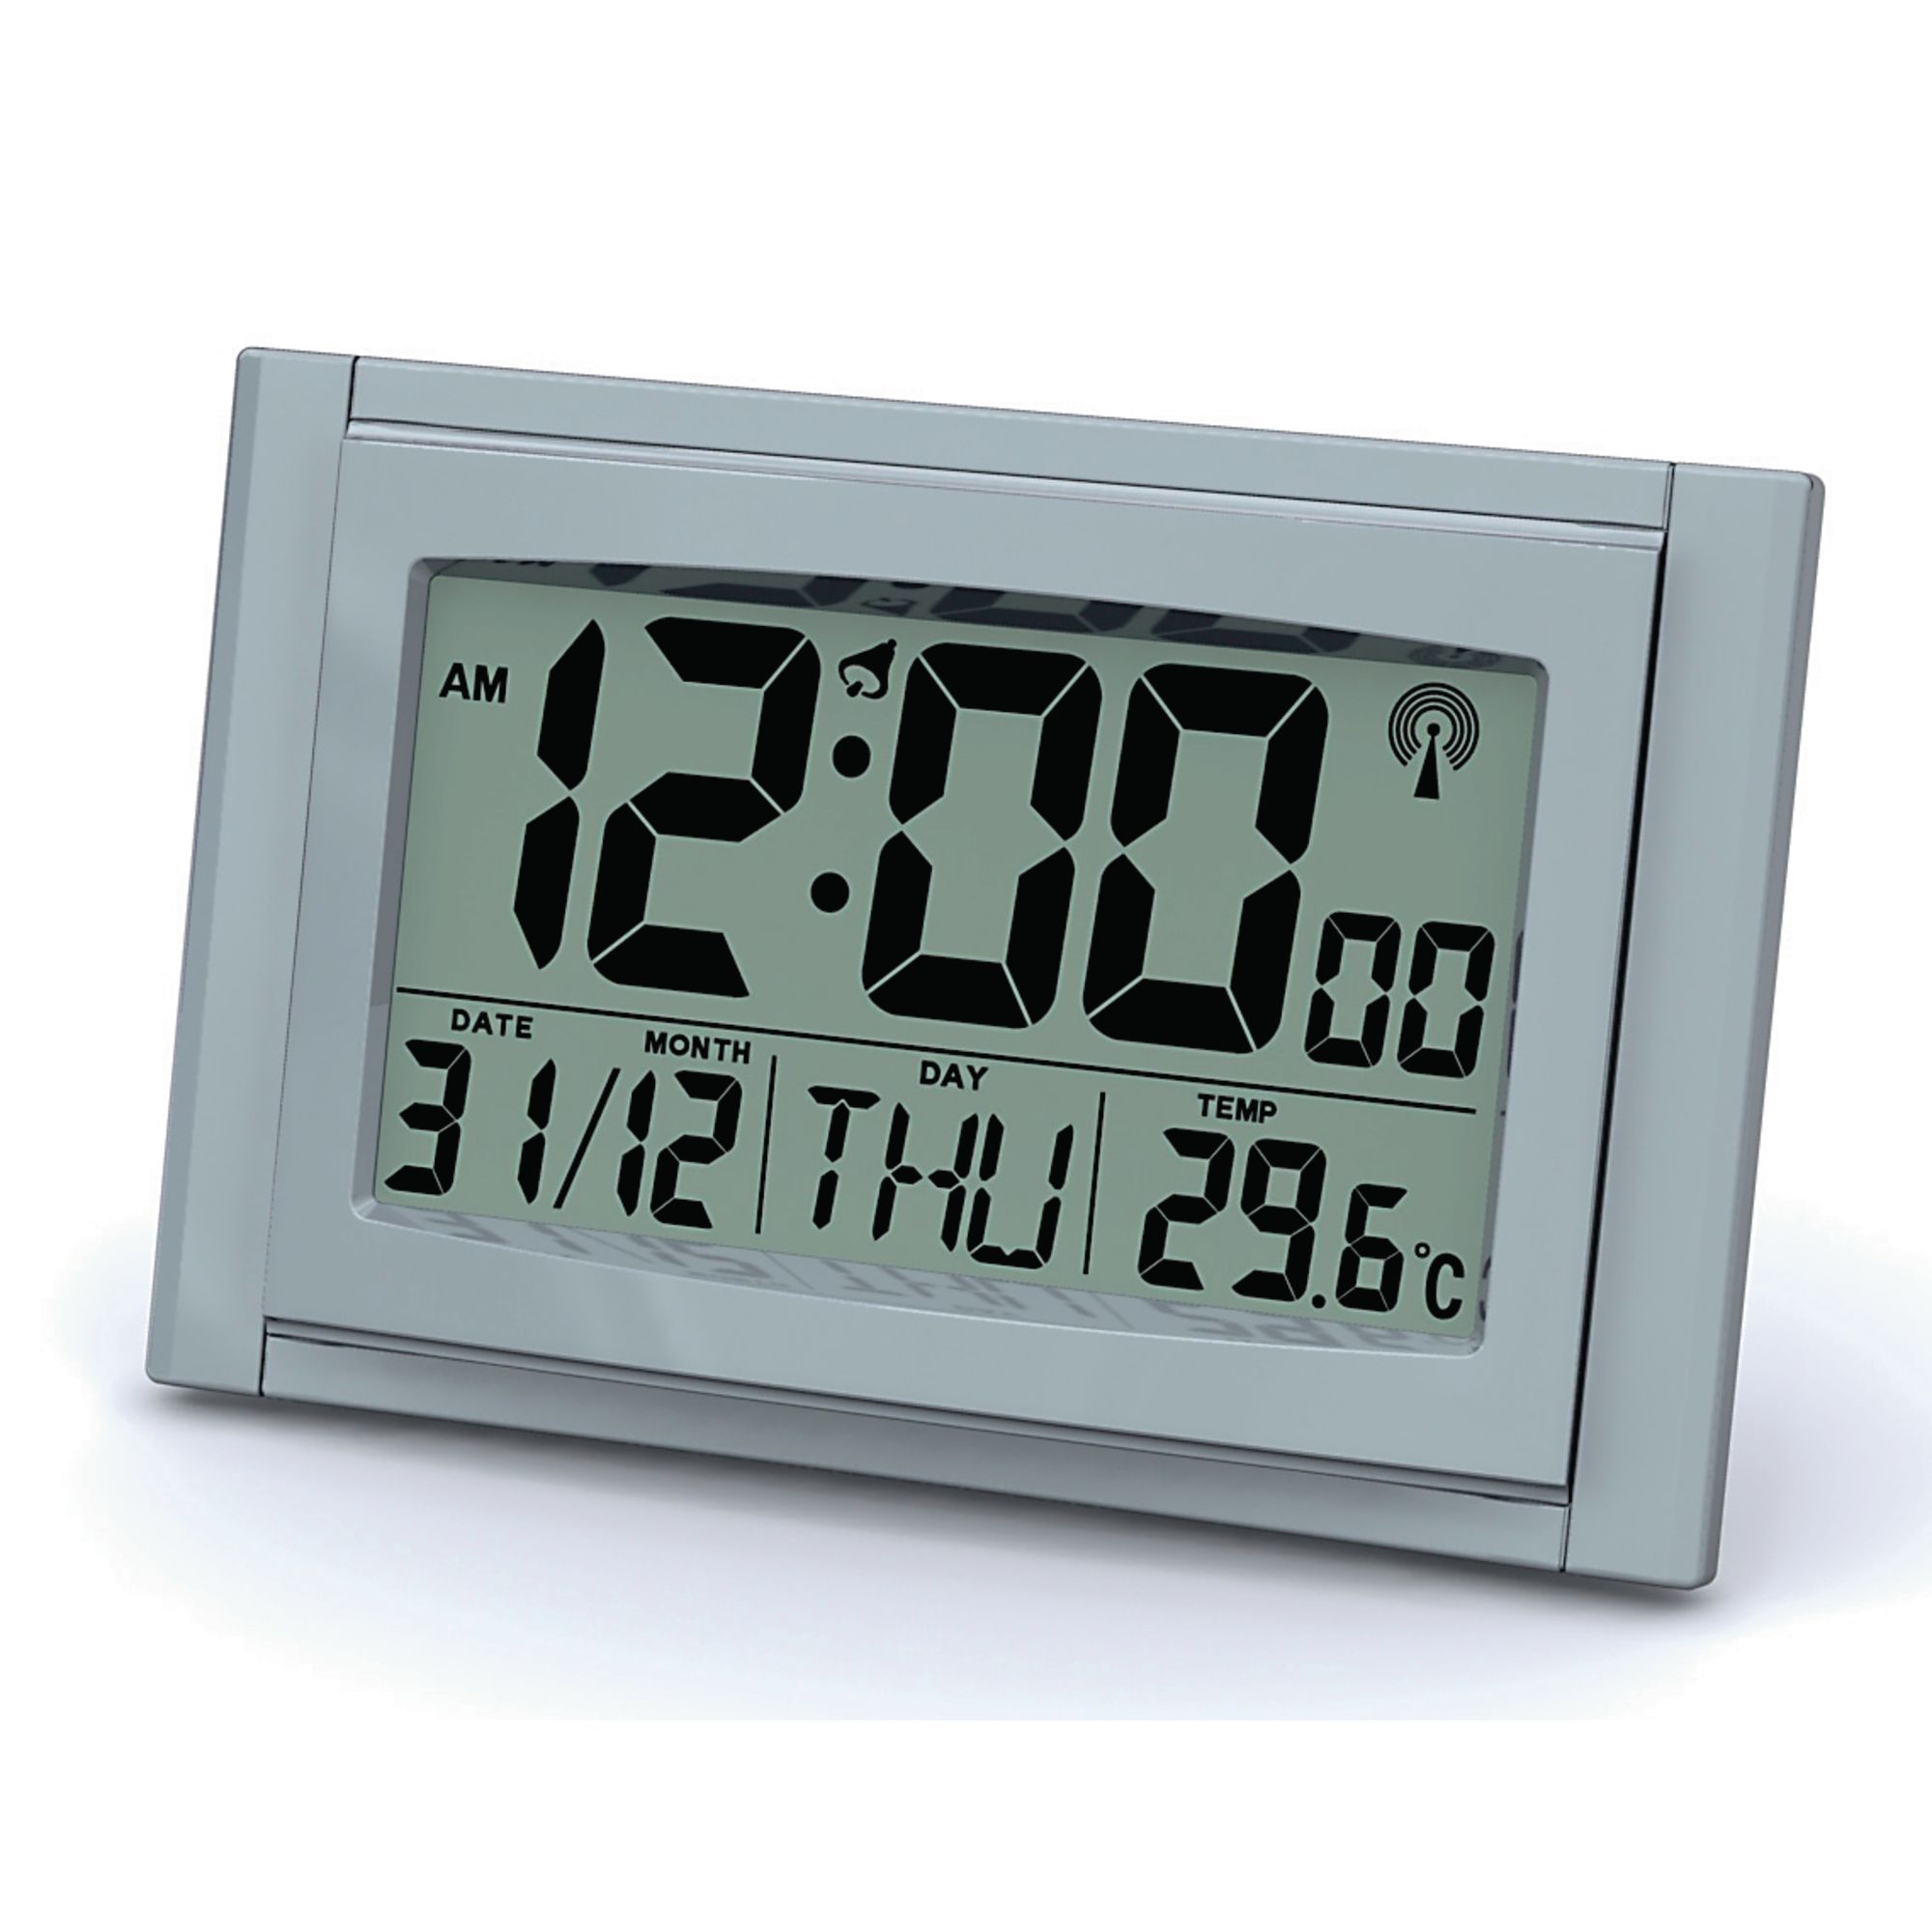 Hc472556 Lcd Radio Controlled Clock, Large Outdoor Radio Controlled Clock